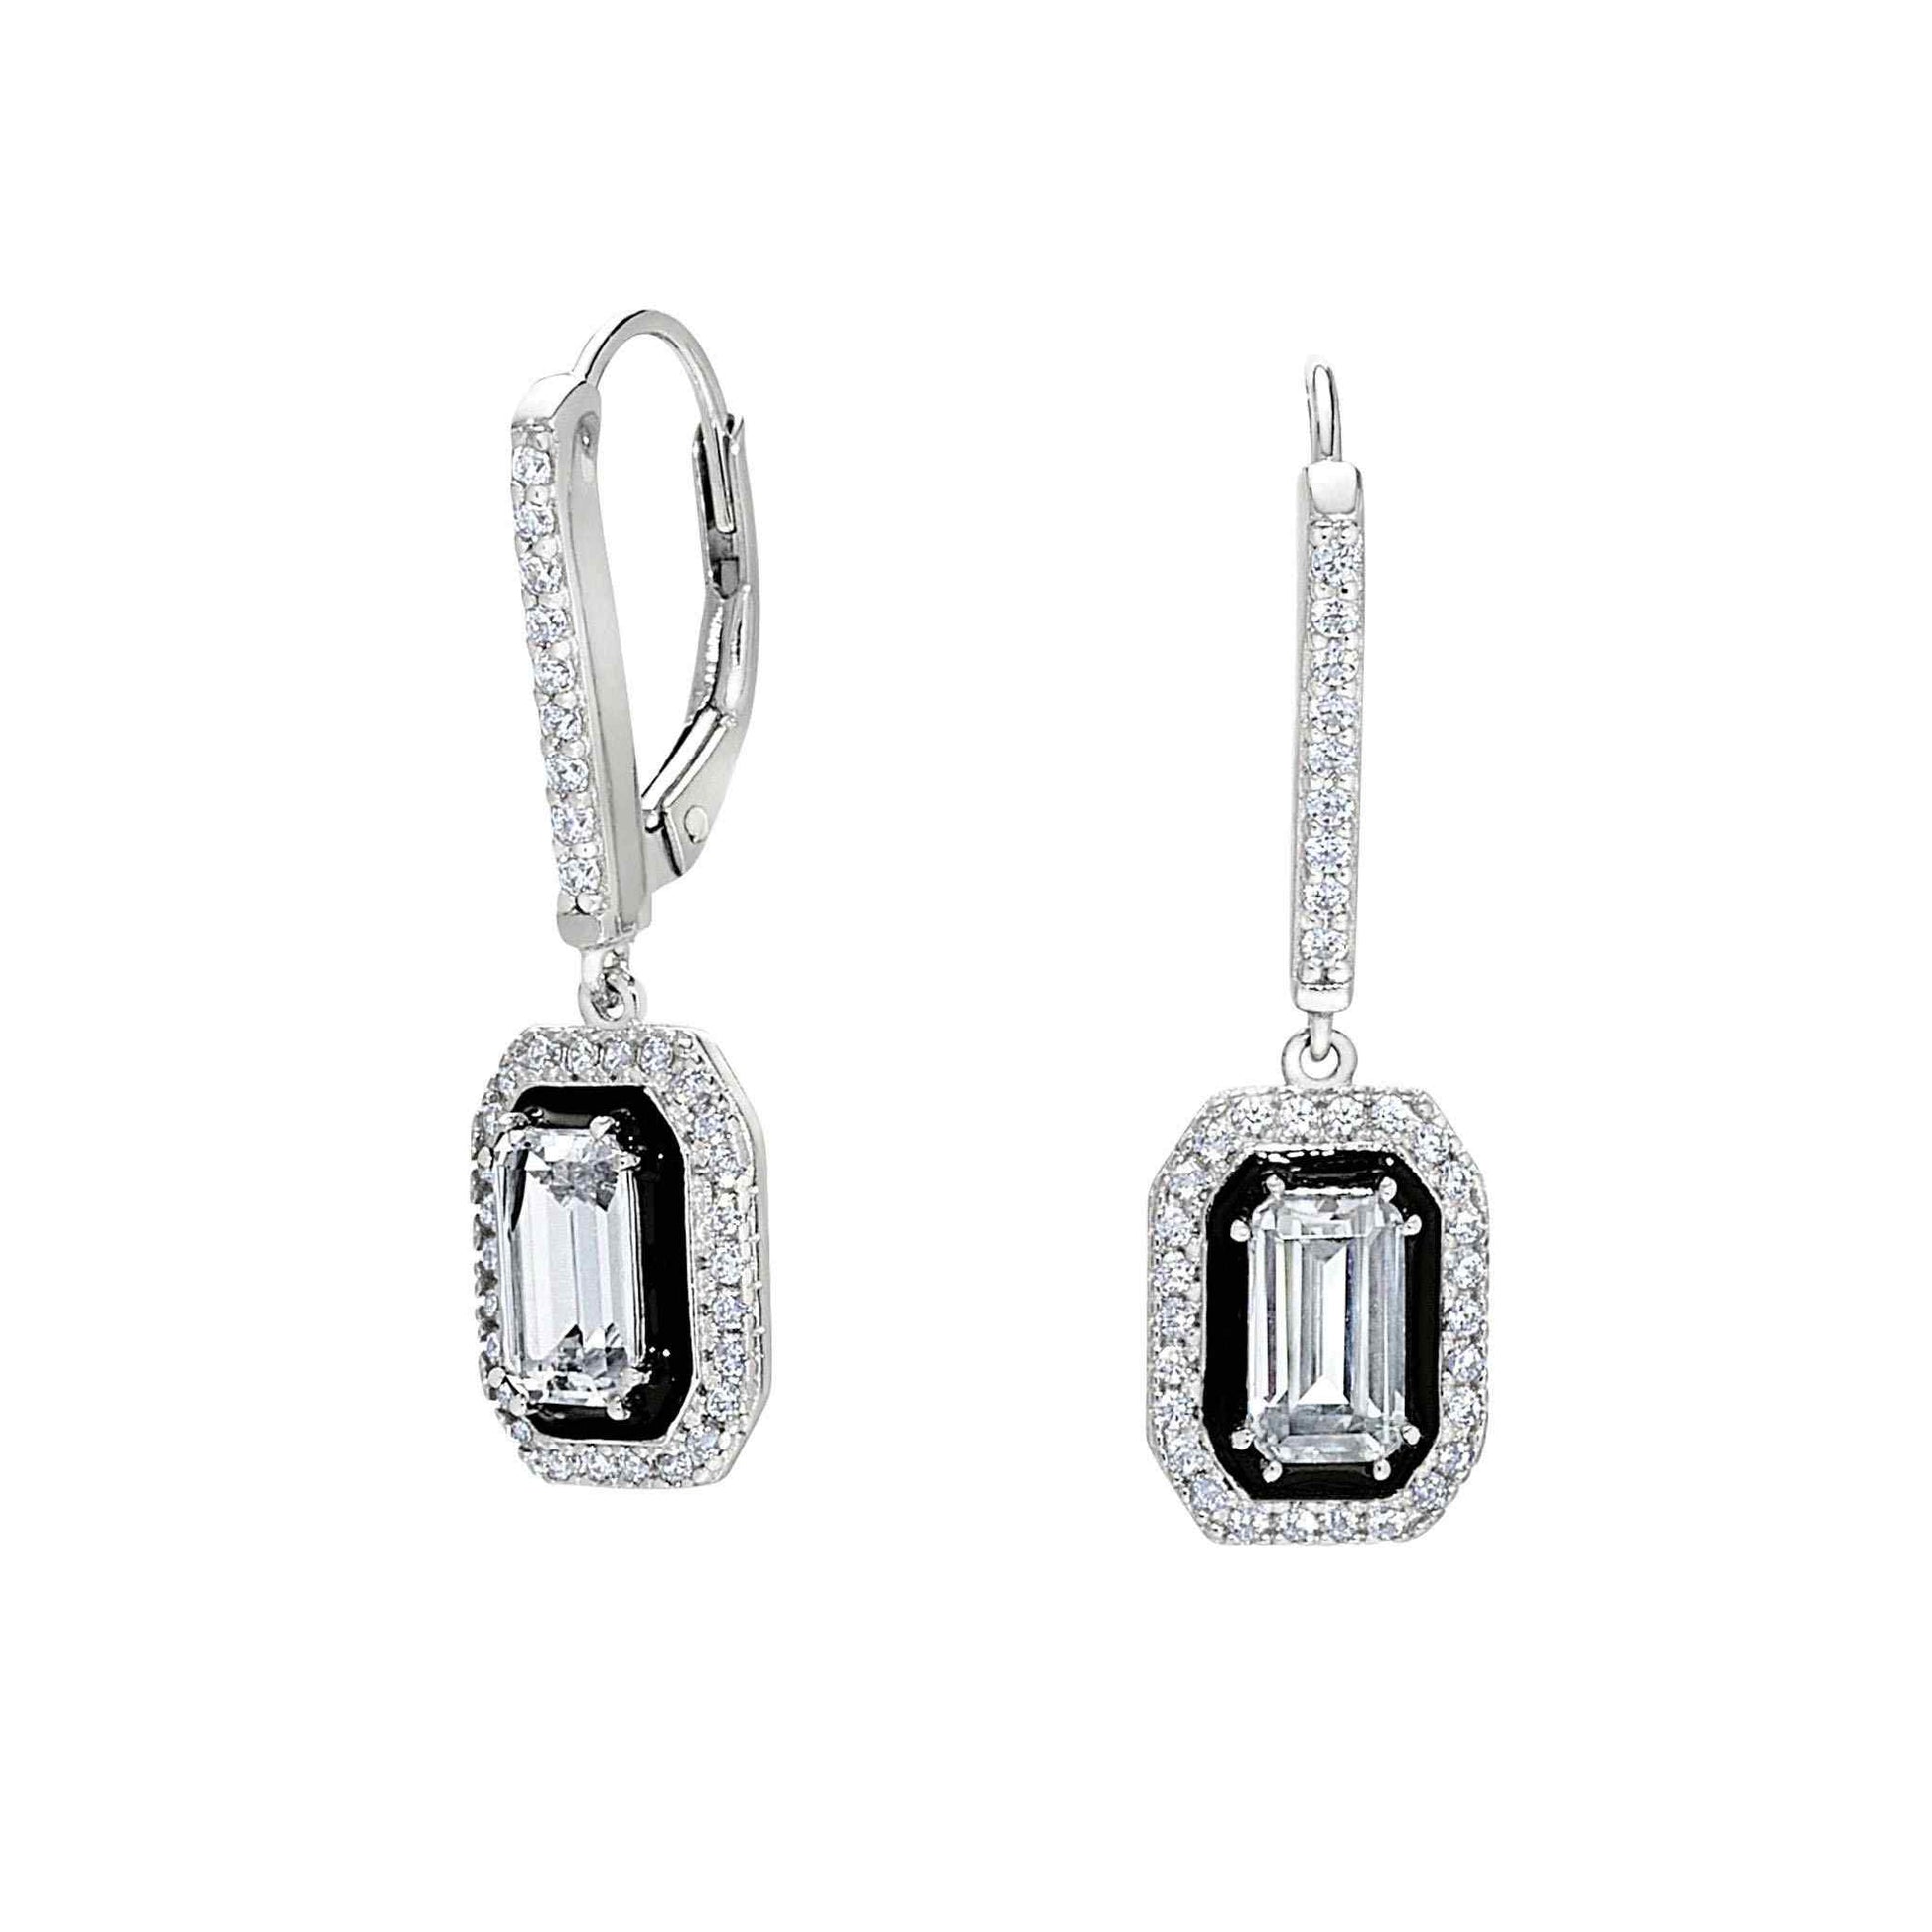 A octagon earrings with black enamel and simulated diamonds displayed on a neutral white background.